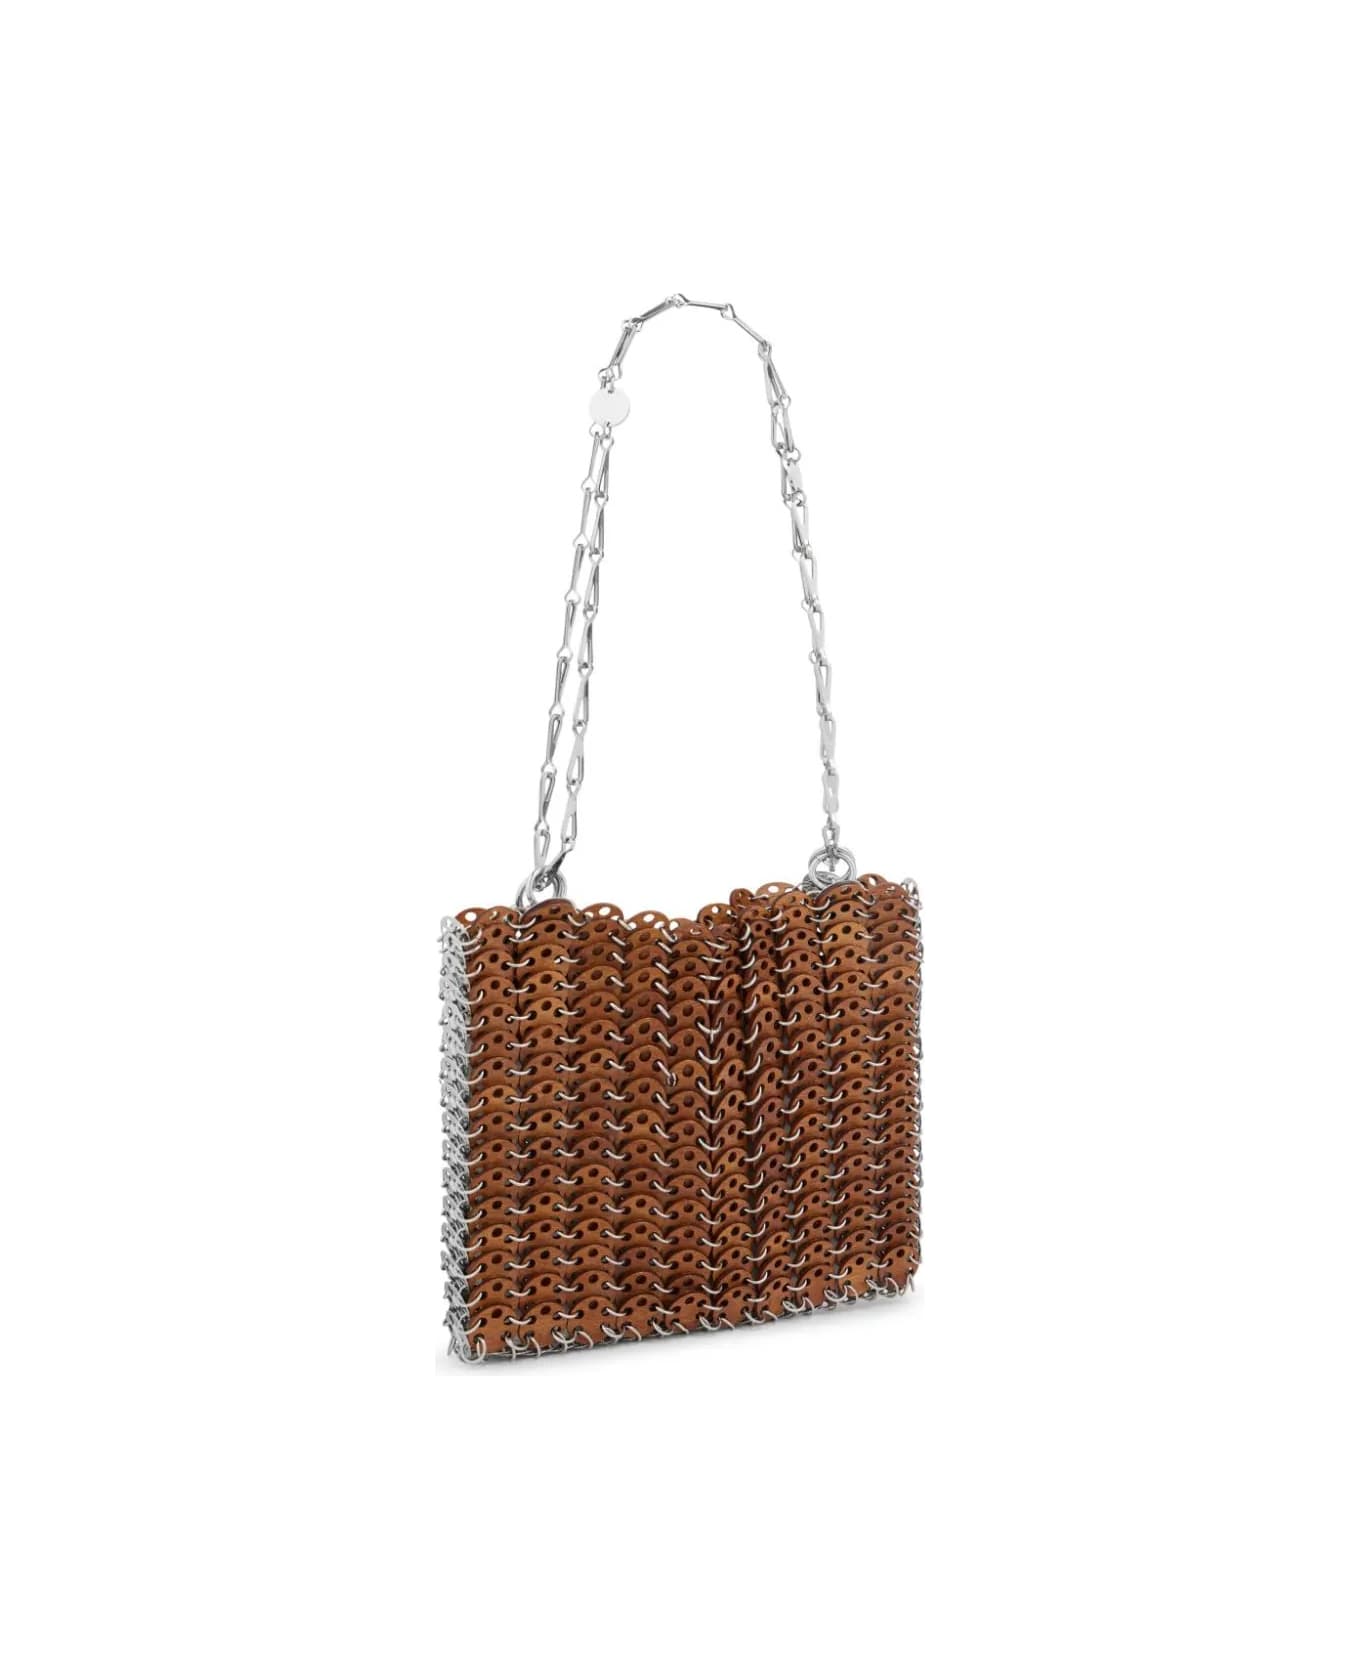 Paco Rabanne Iconic 1969 Bag In Brown Wood - Brown バッグ